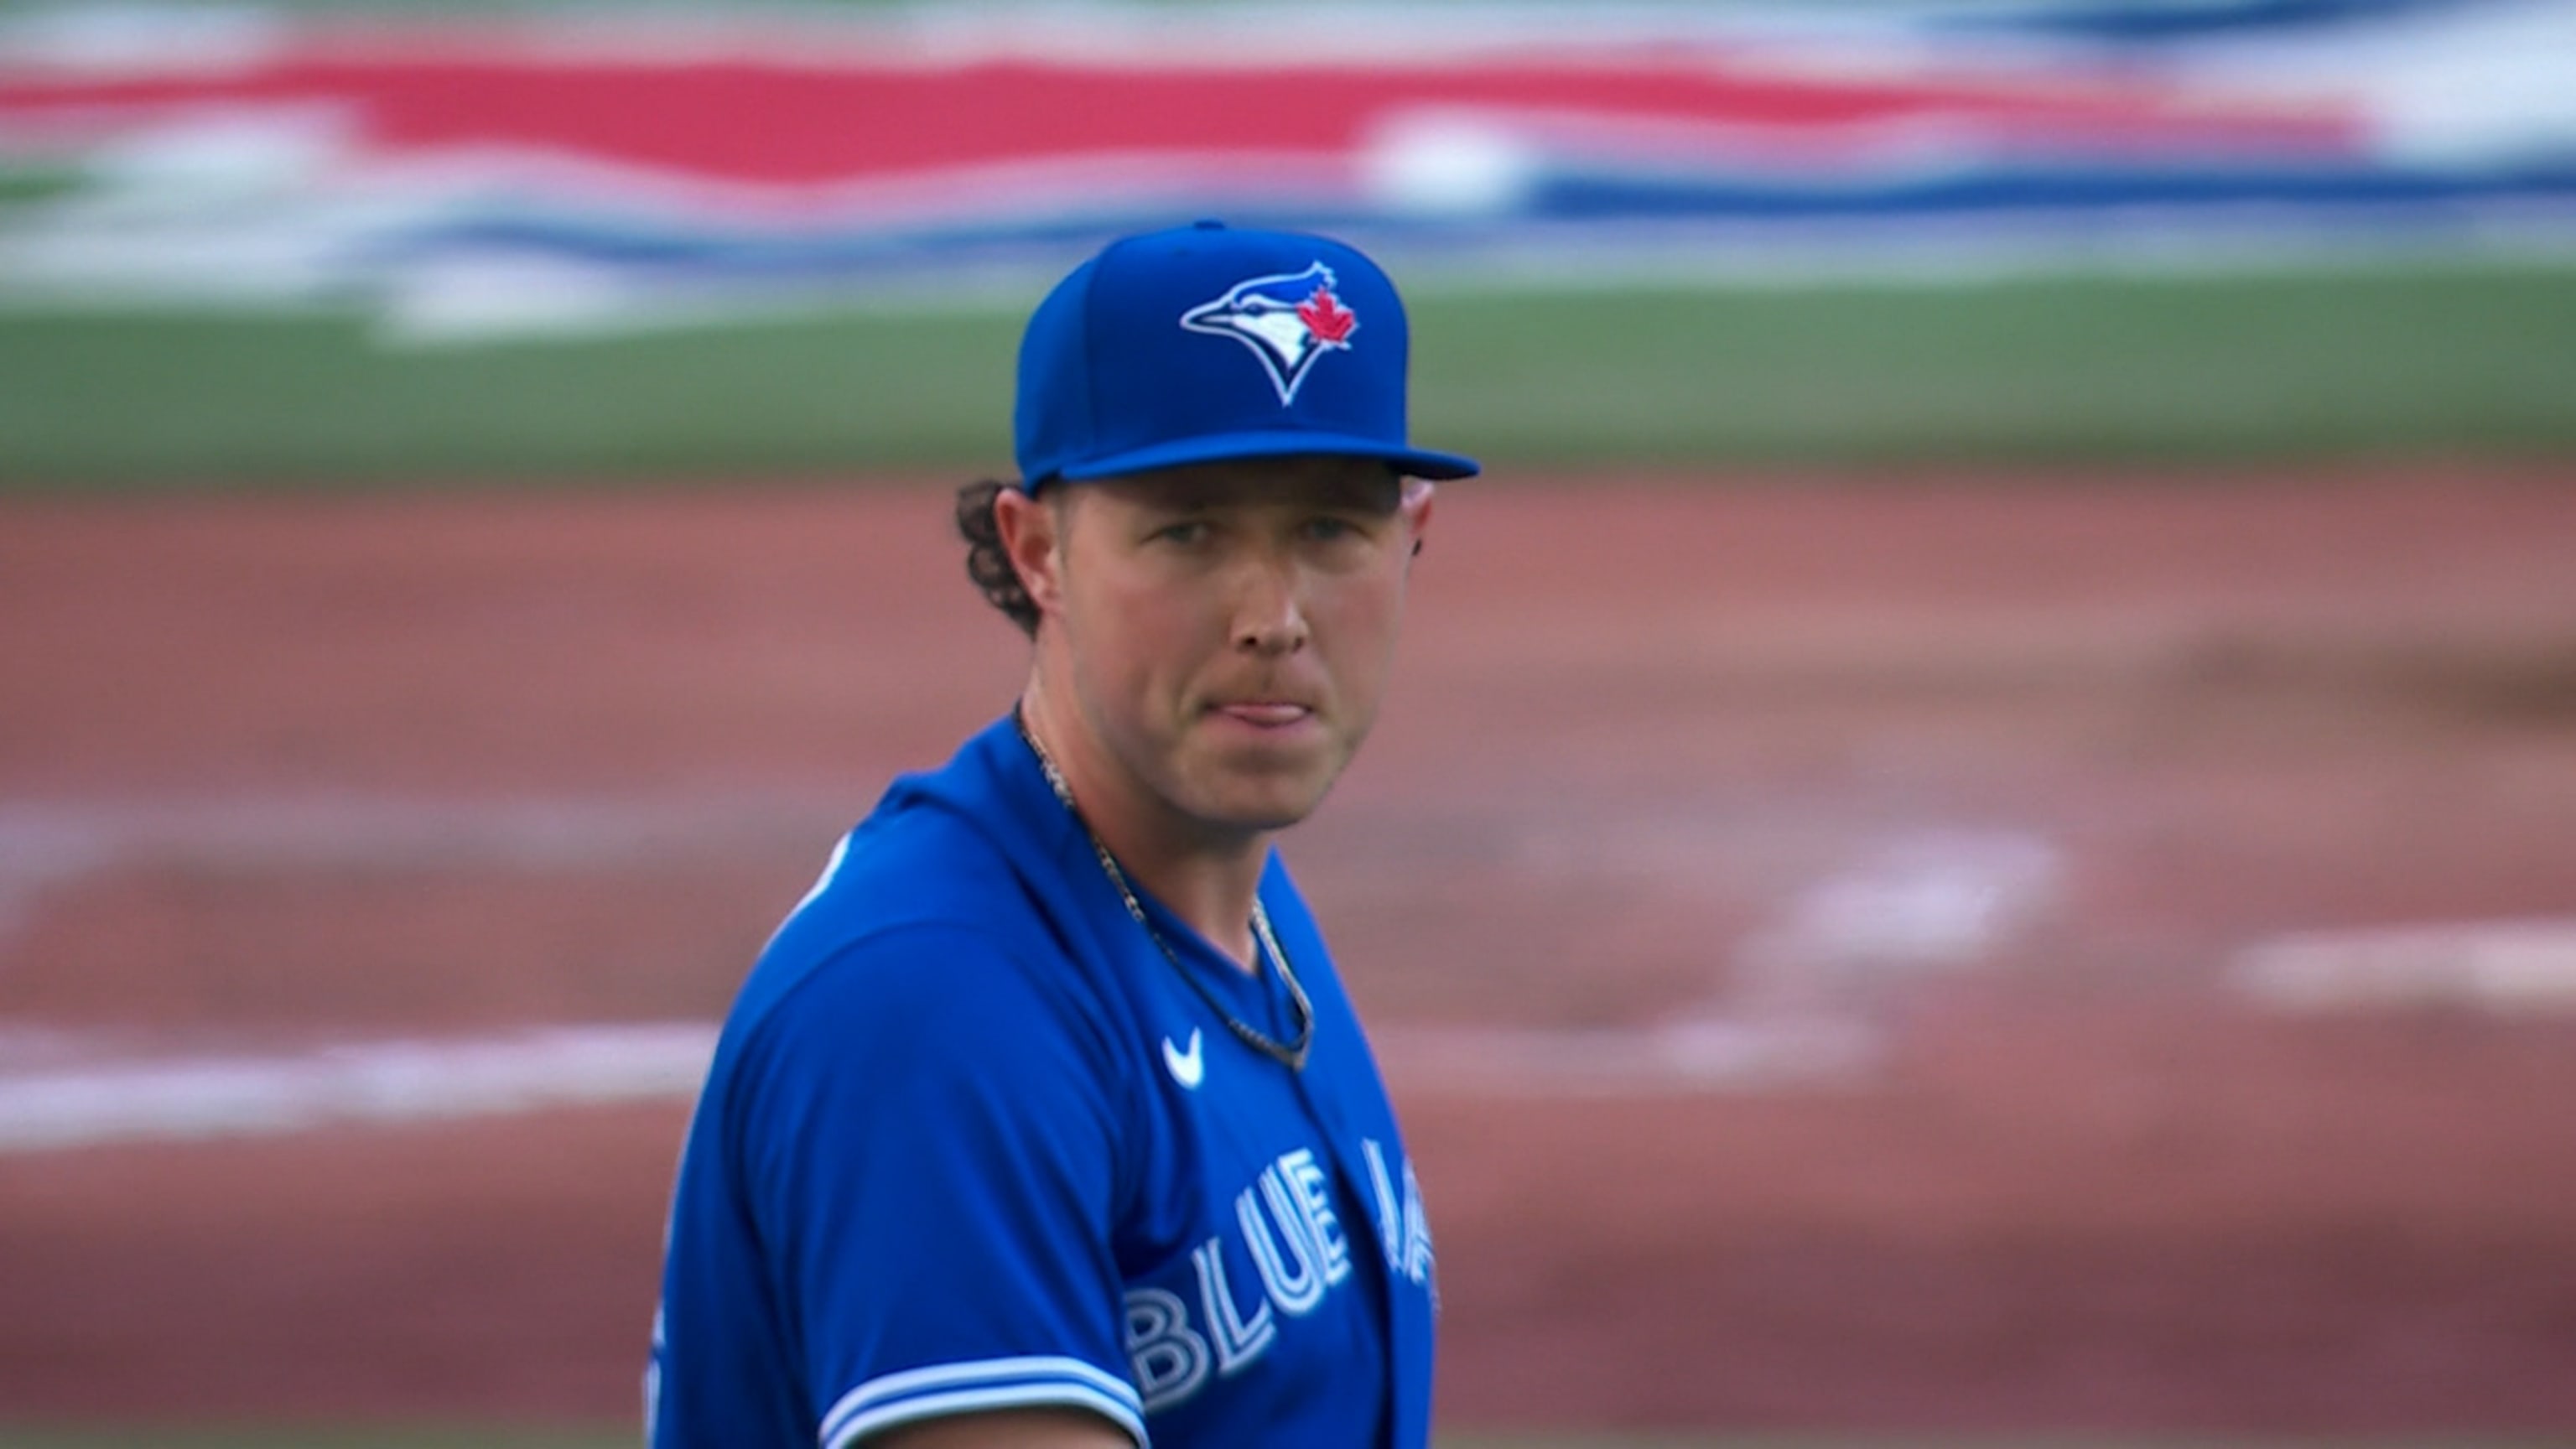 Should Jordan Romano be closing games for the Blue Jays with injury issues?